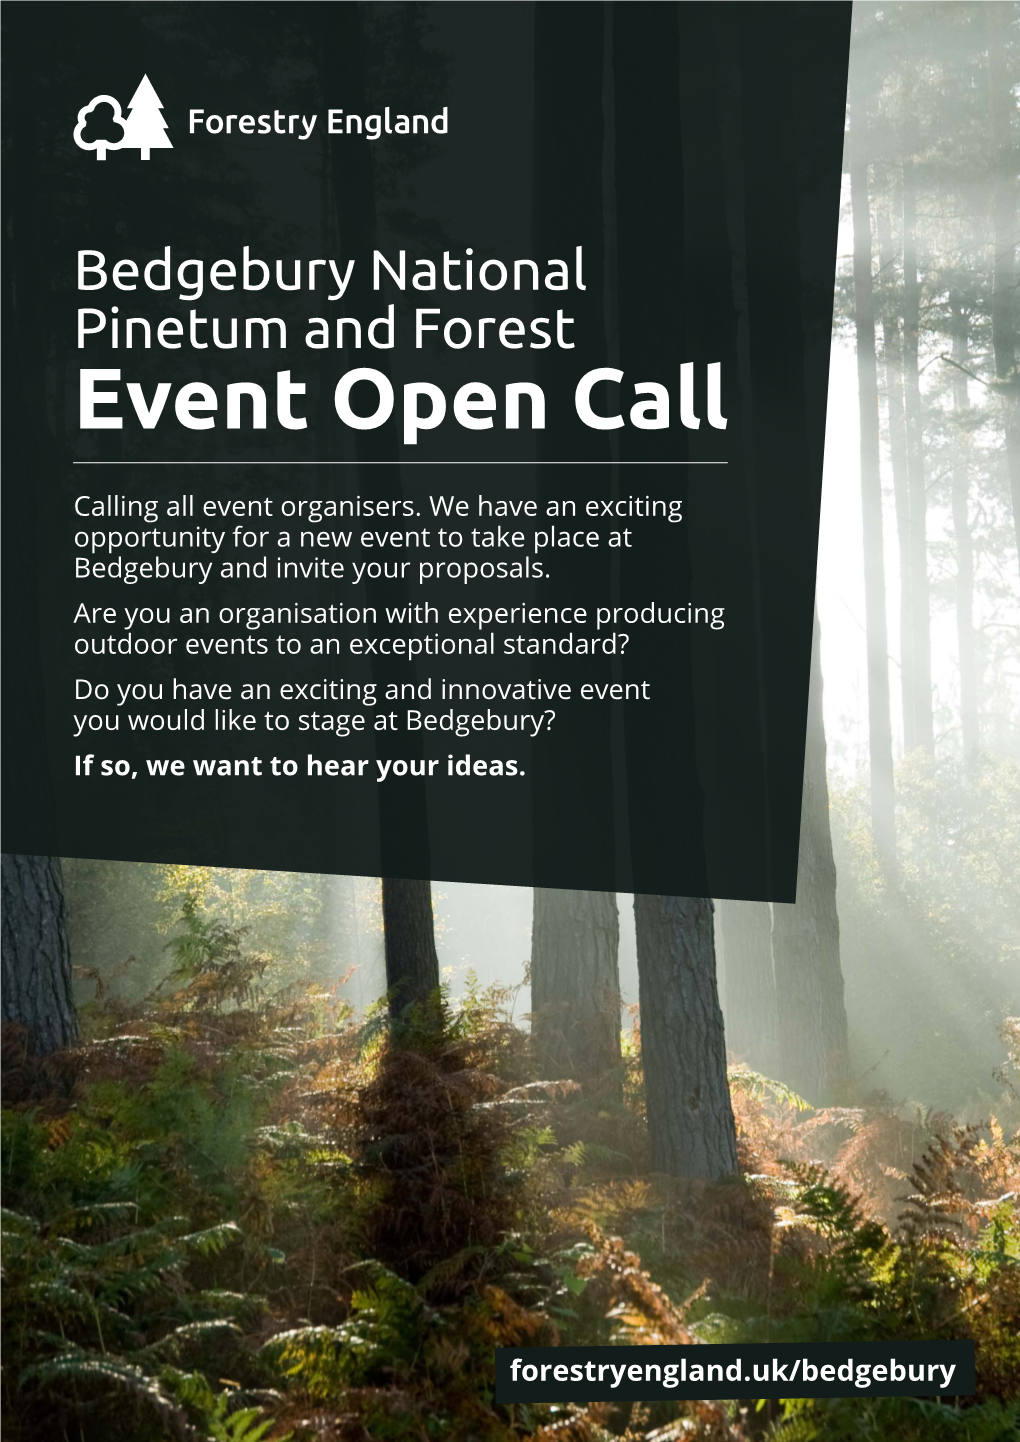 Bedgebury National Pinetum and Forest Event Open Call